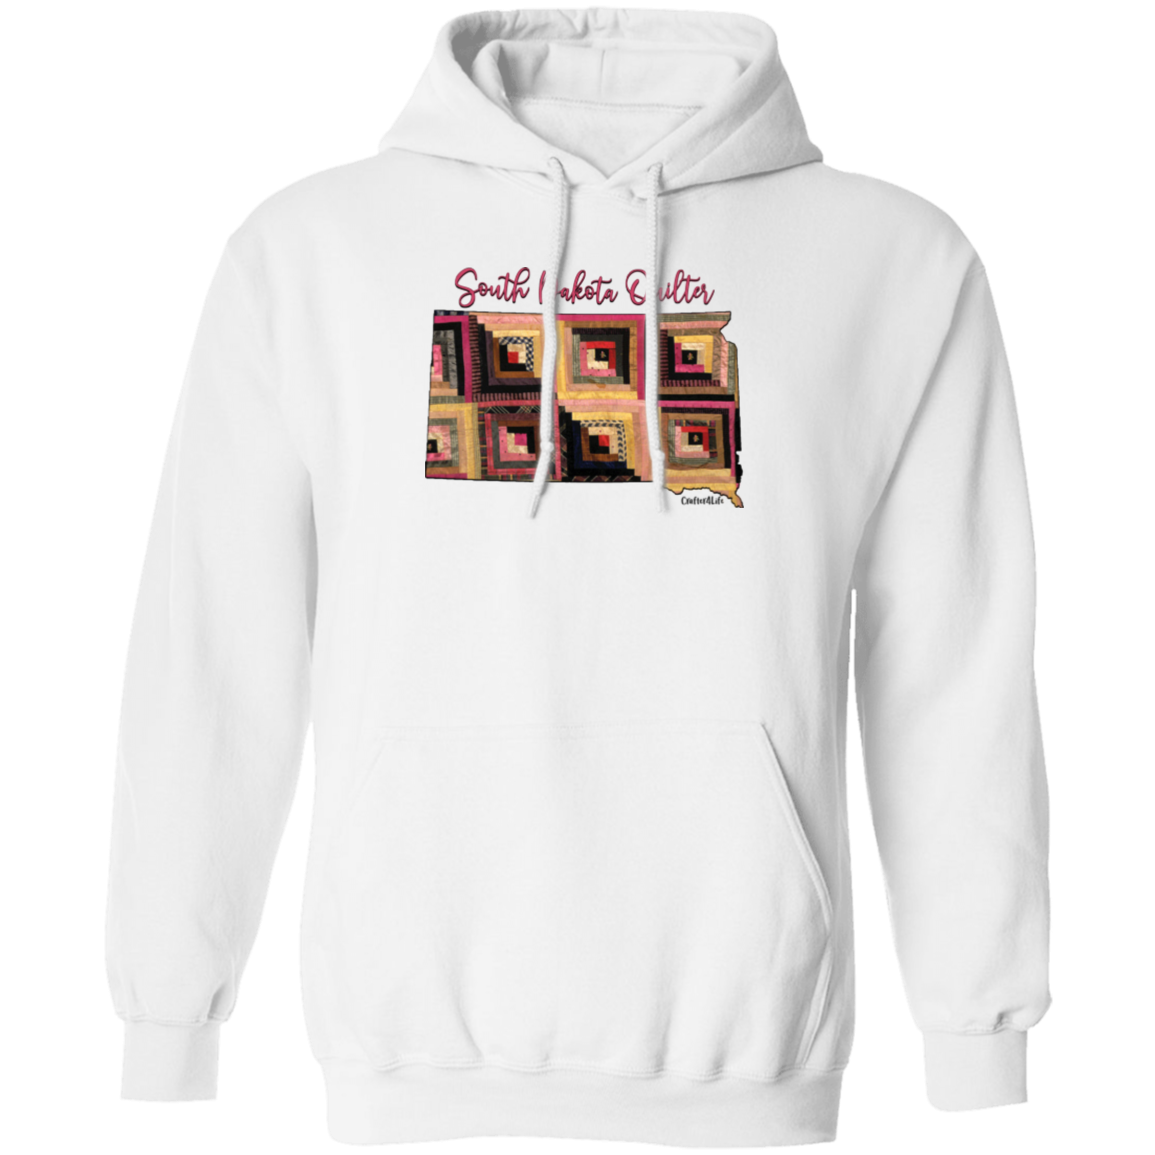 South Dakota Quilter Pullover Hoodie, Gift for Quilting Friends and Family